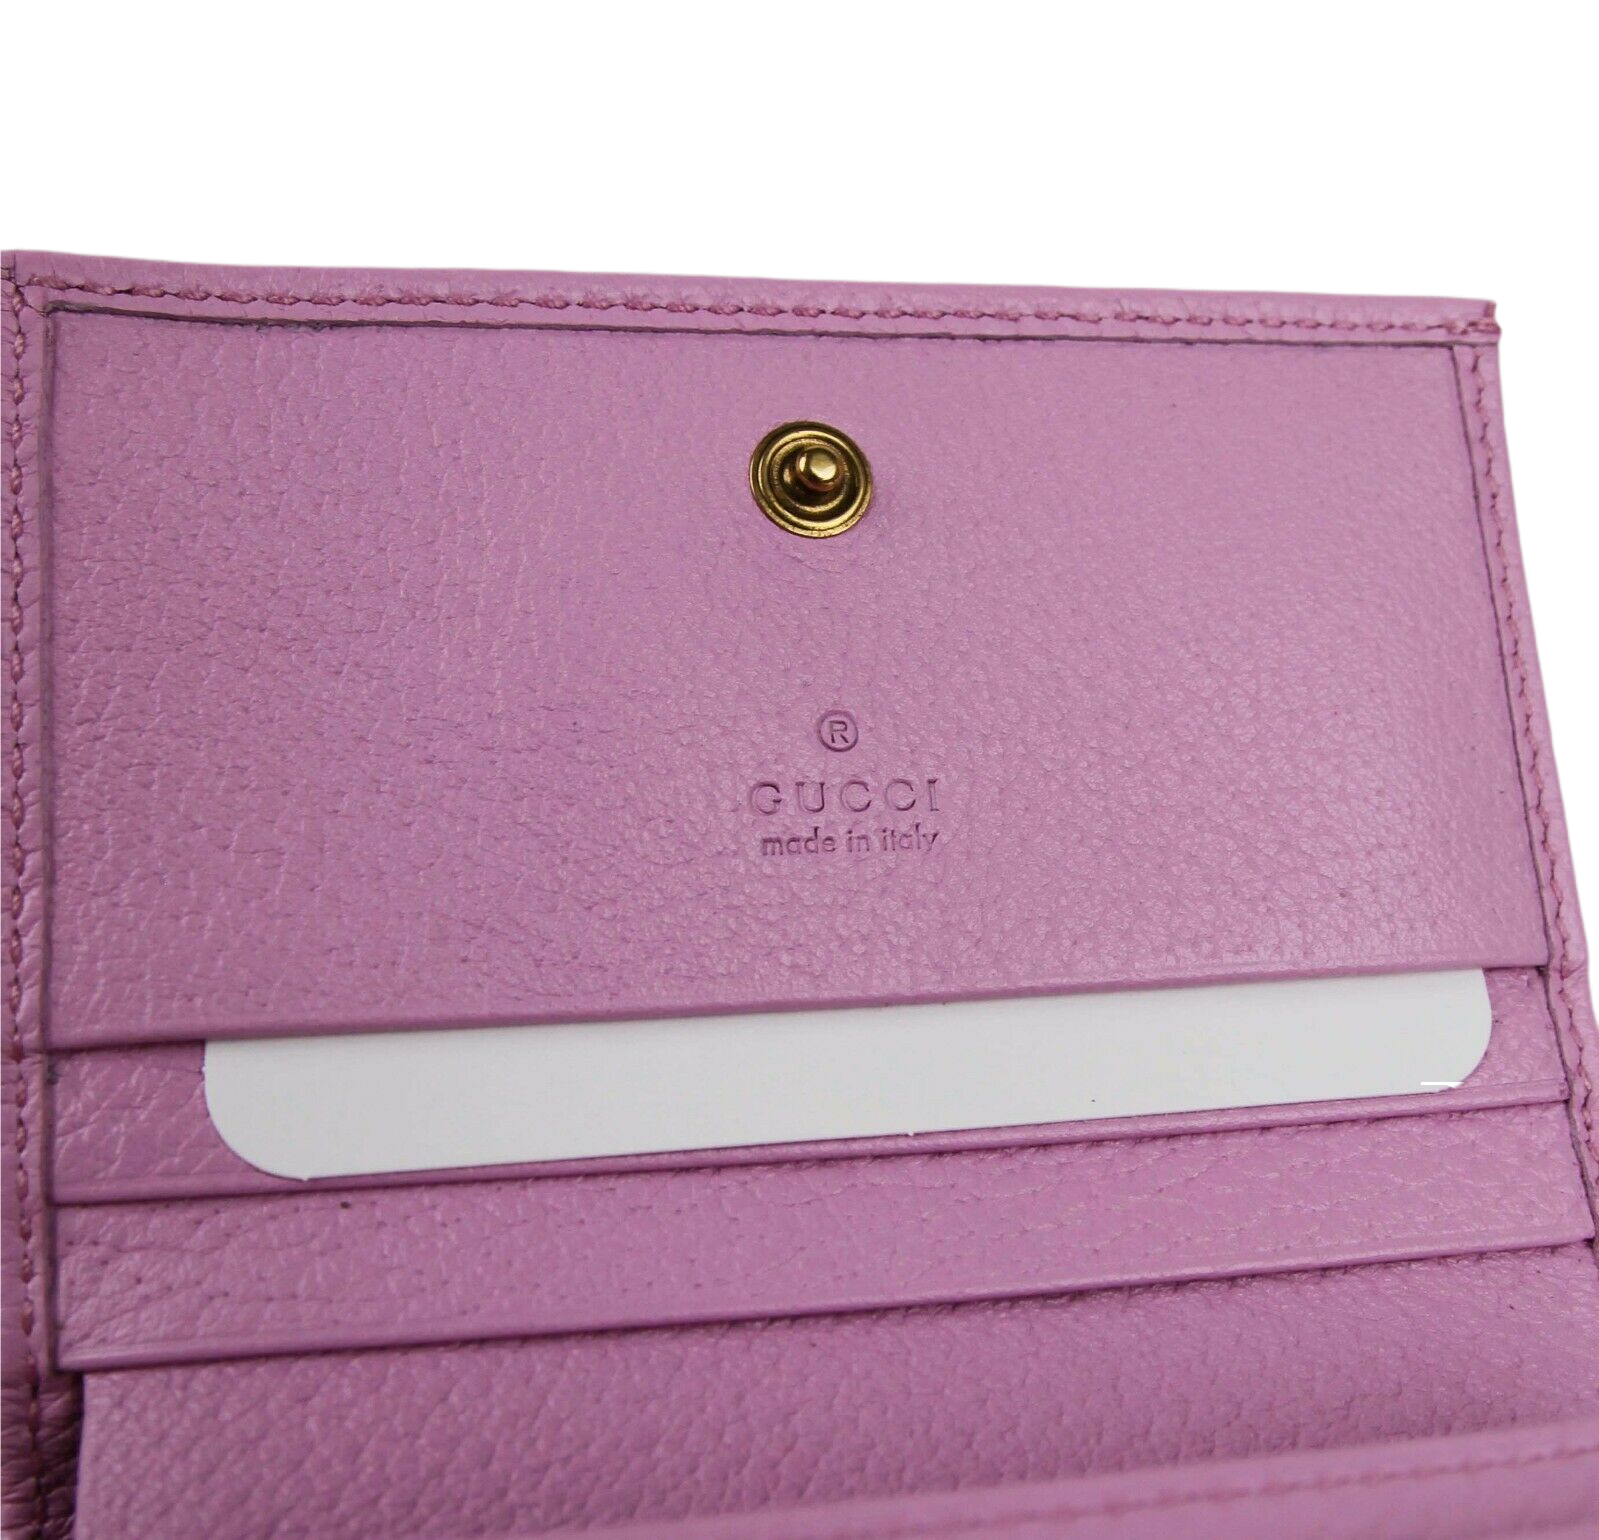  Gucci Marmont Women's Pink Leather Wallet w/Crystal Double G :  Clothing, Shoes & Jewelry